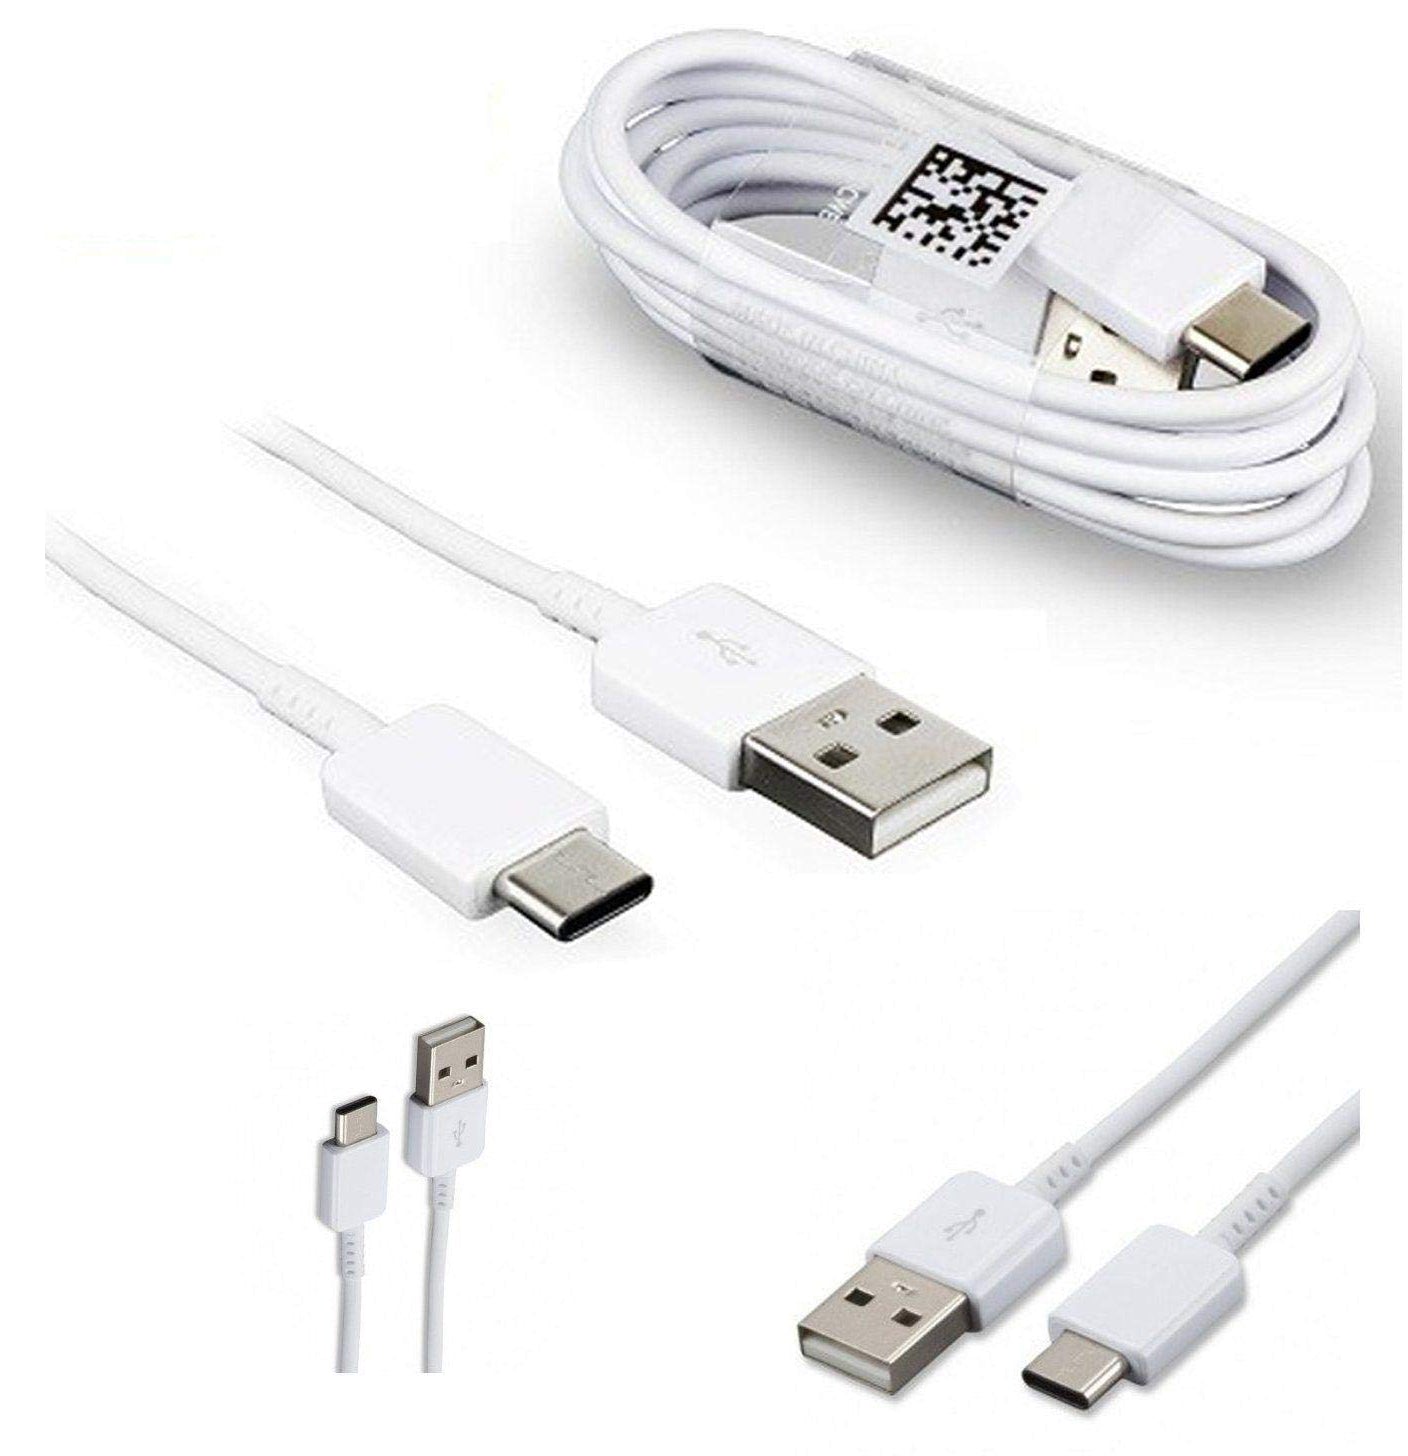 2 pack 4 ft USB 2.0 to C-type Charging Cable and Charging Adapter Combo Pack